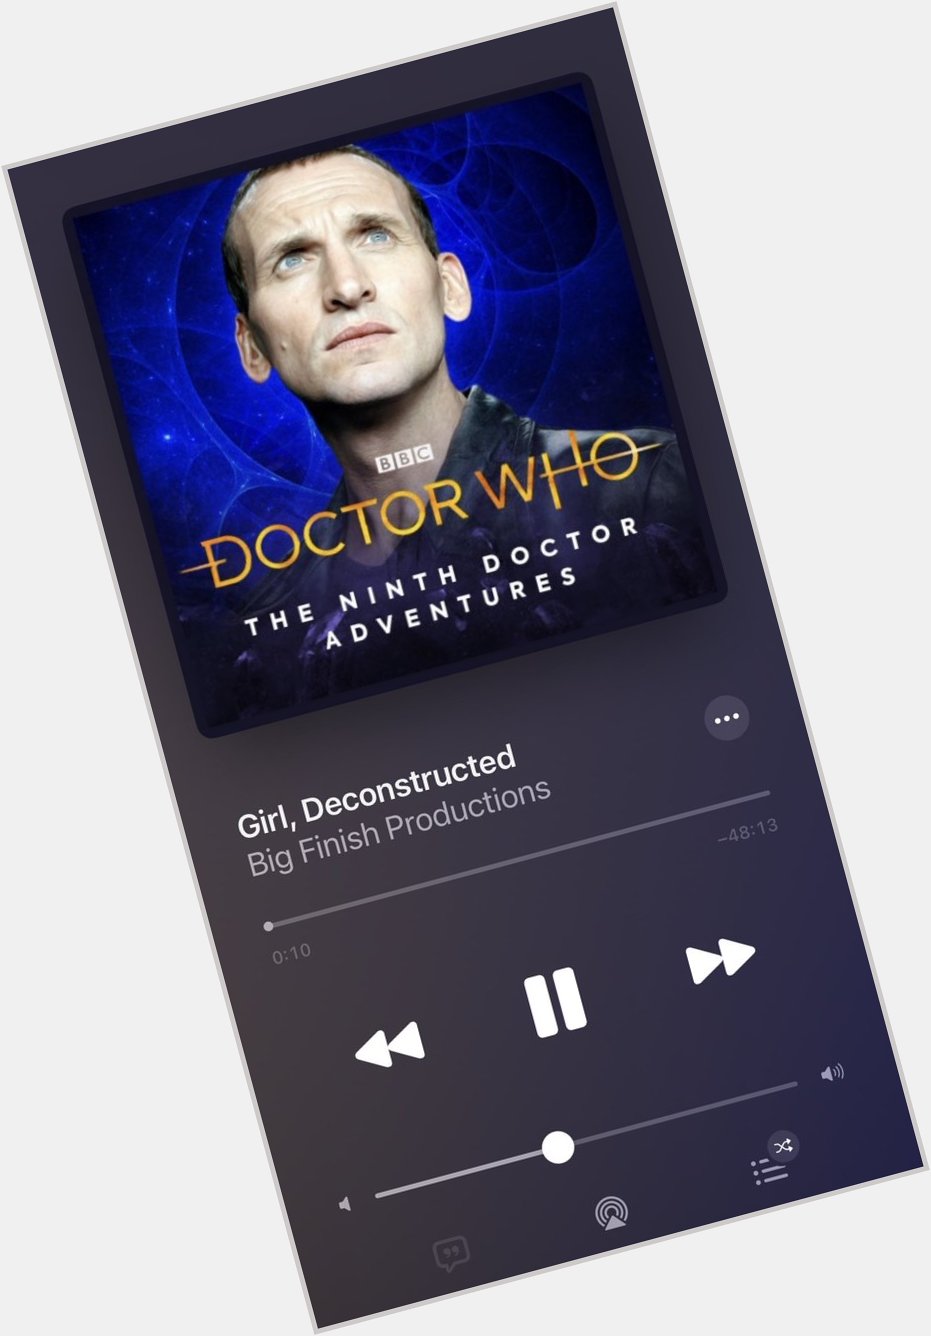 Happy birthday, Christopher Eccleston! Thank you for the continued adventures,  